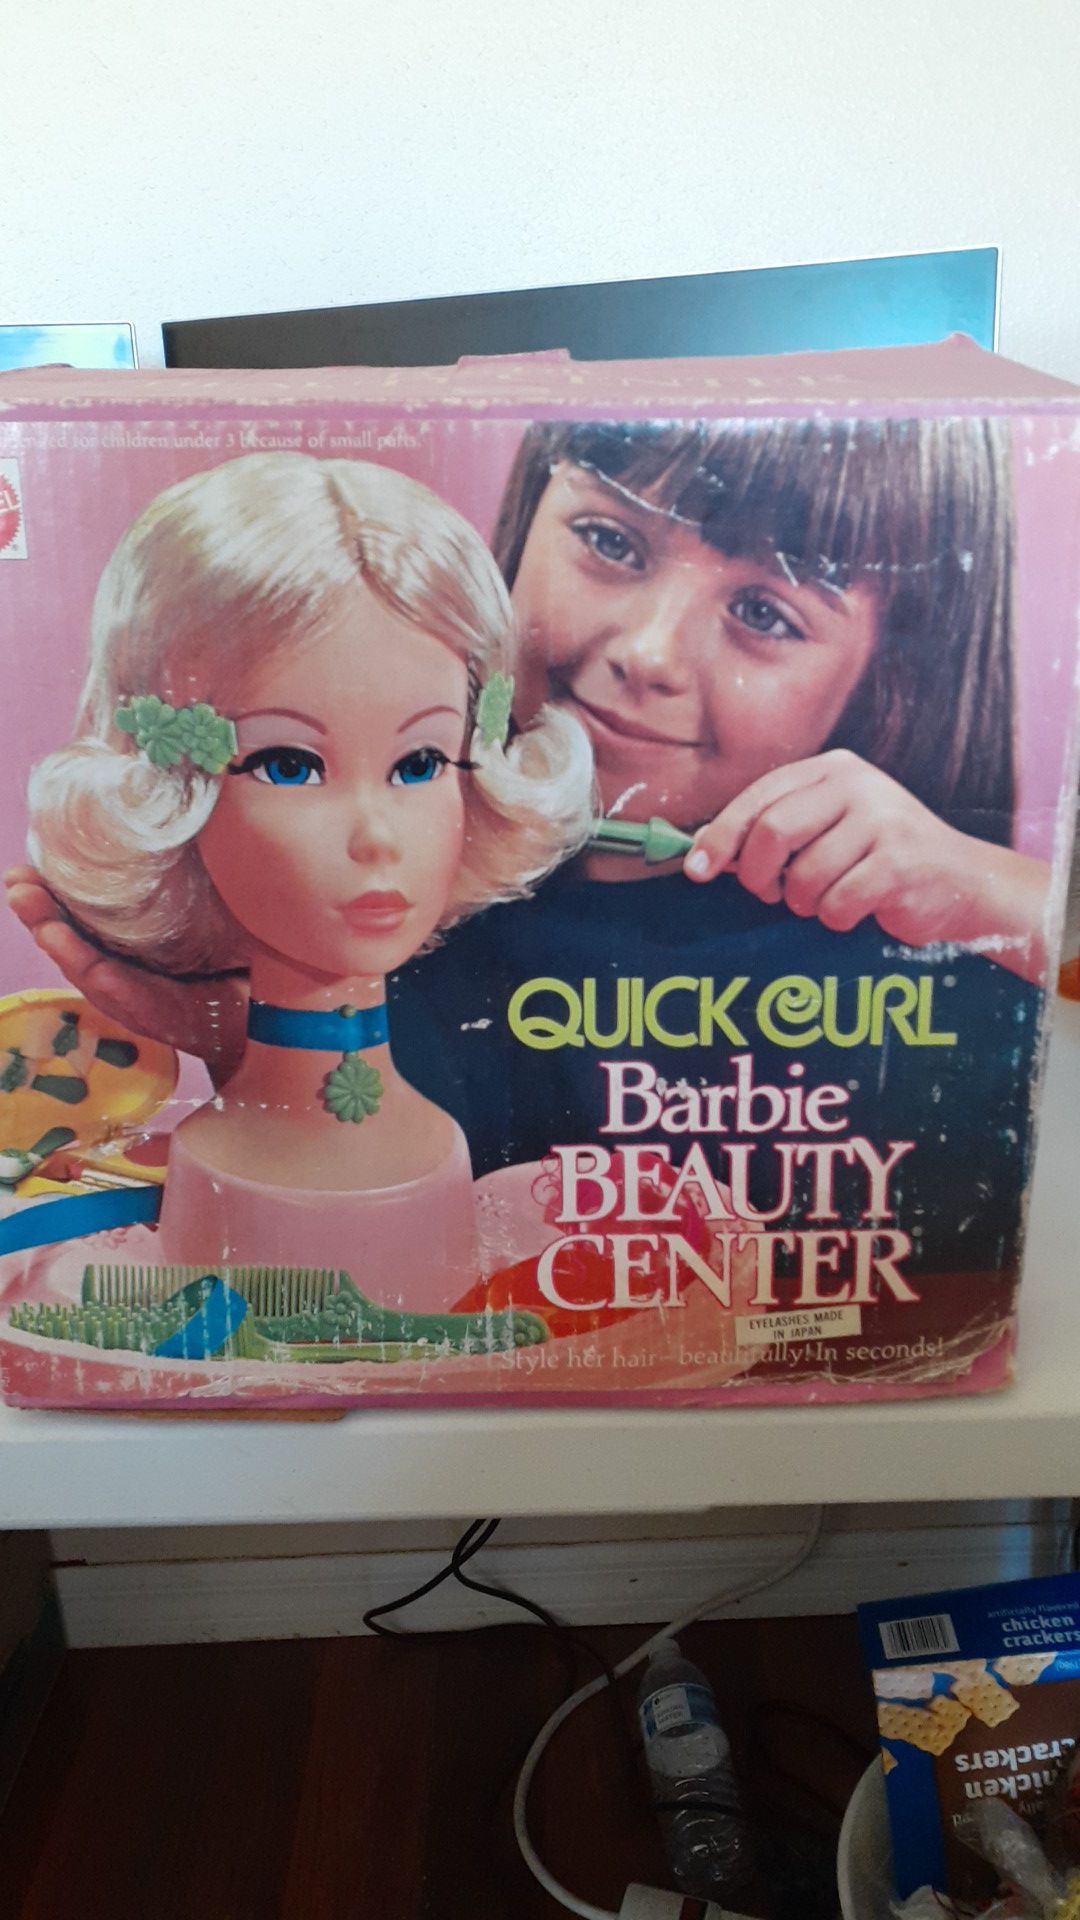 BARBIE QUICK CURL BEAUTY CENTER USED BY MATTEL